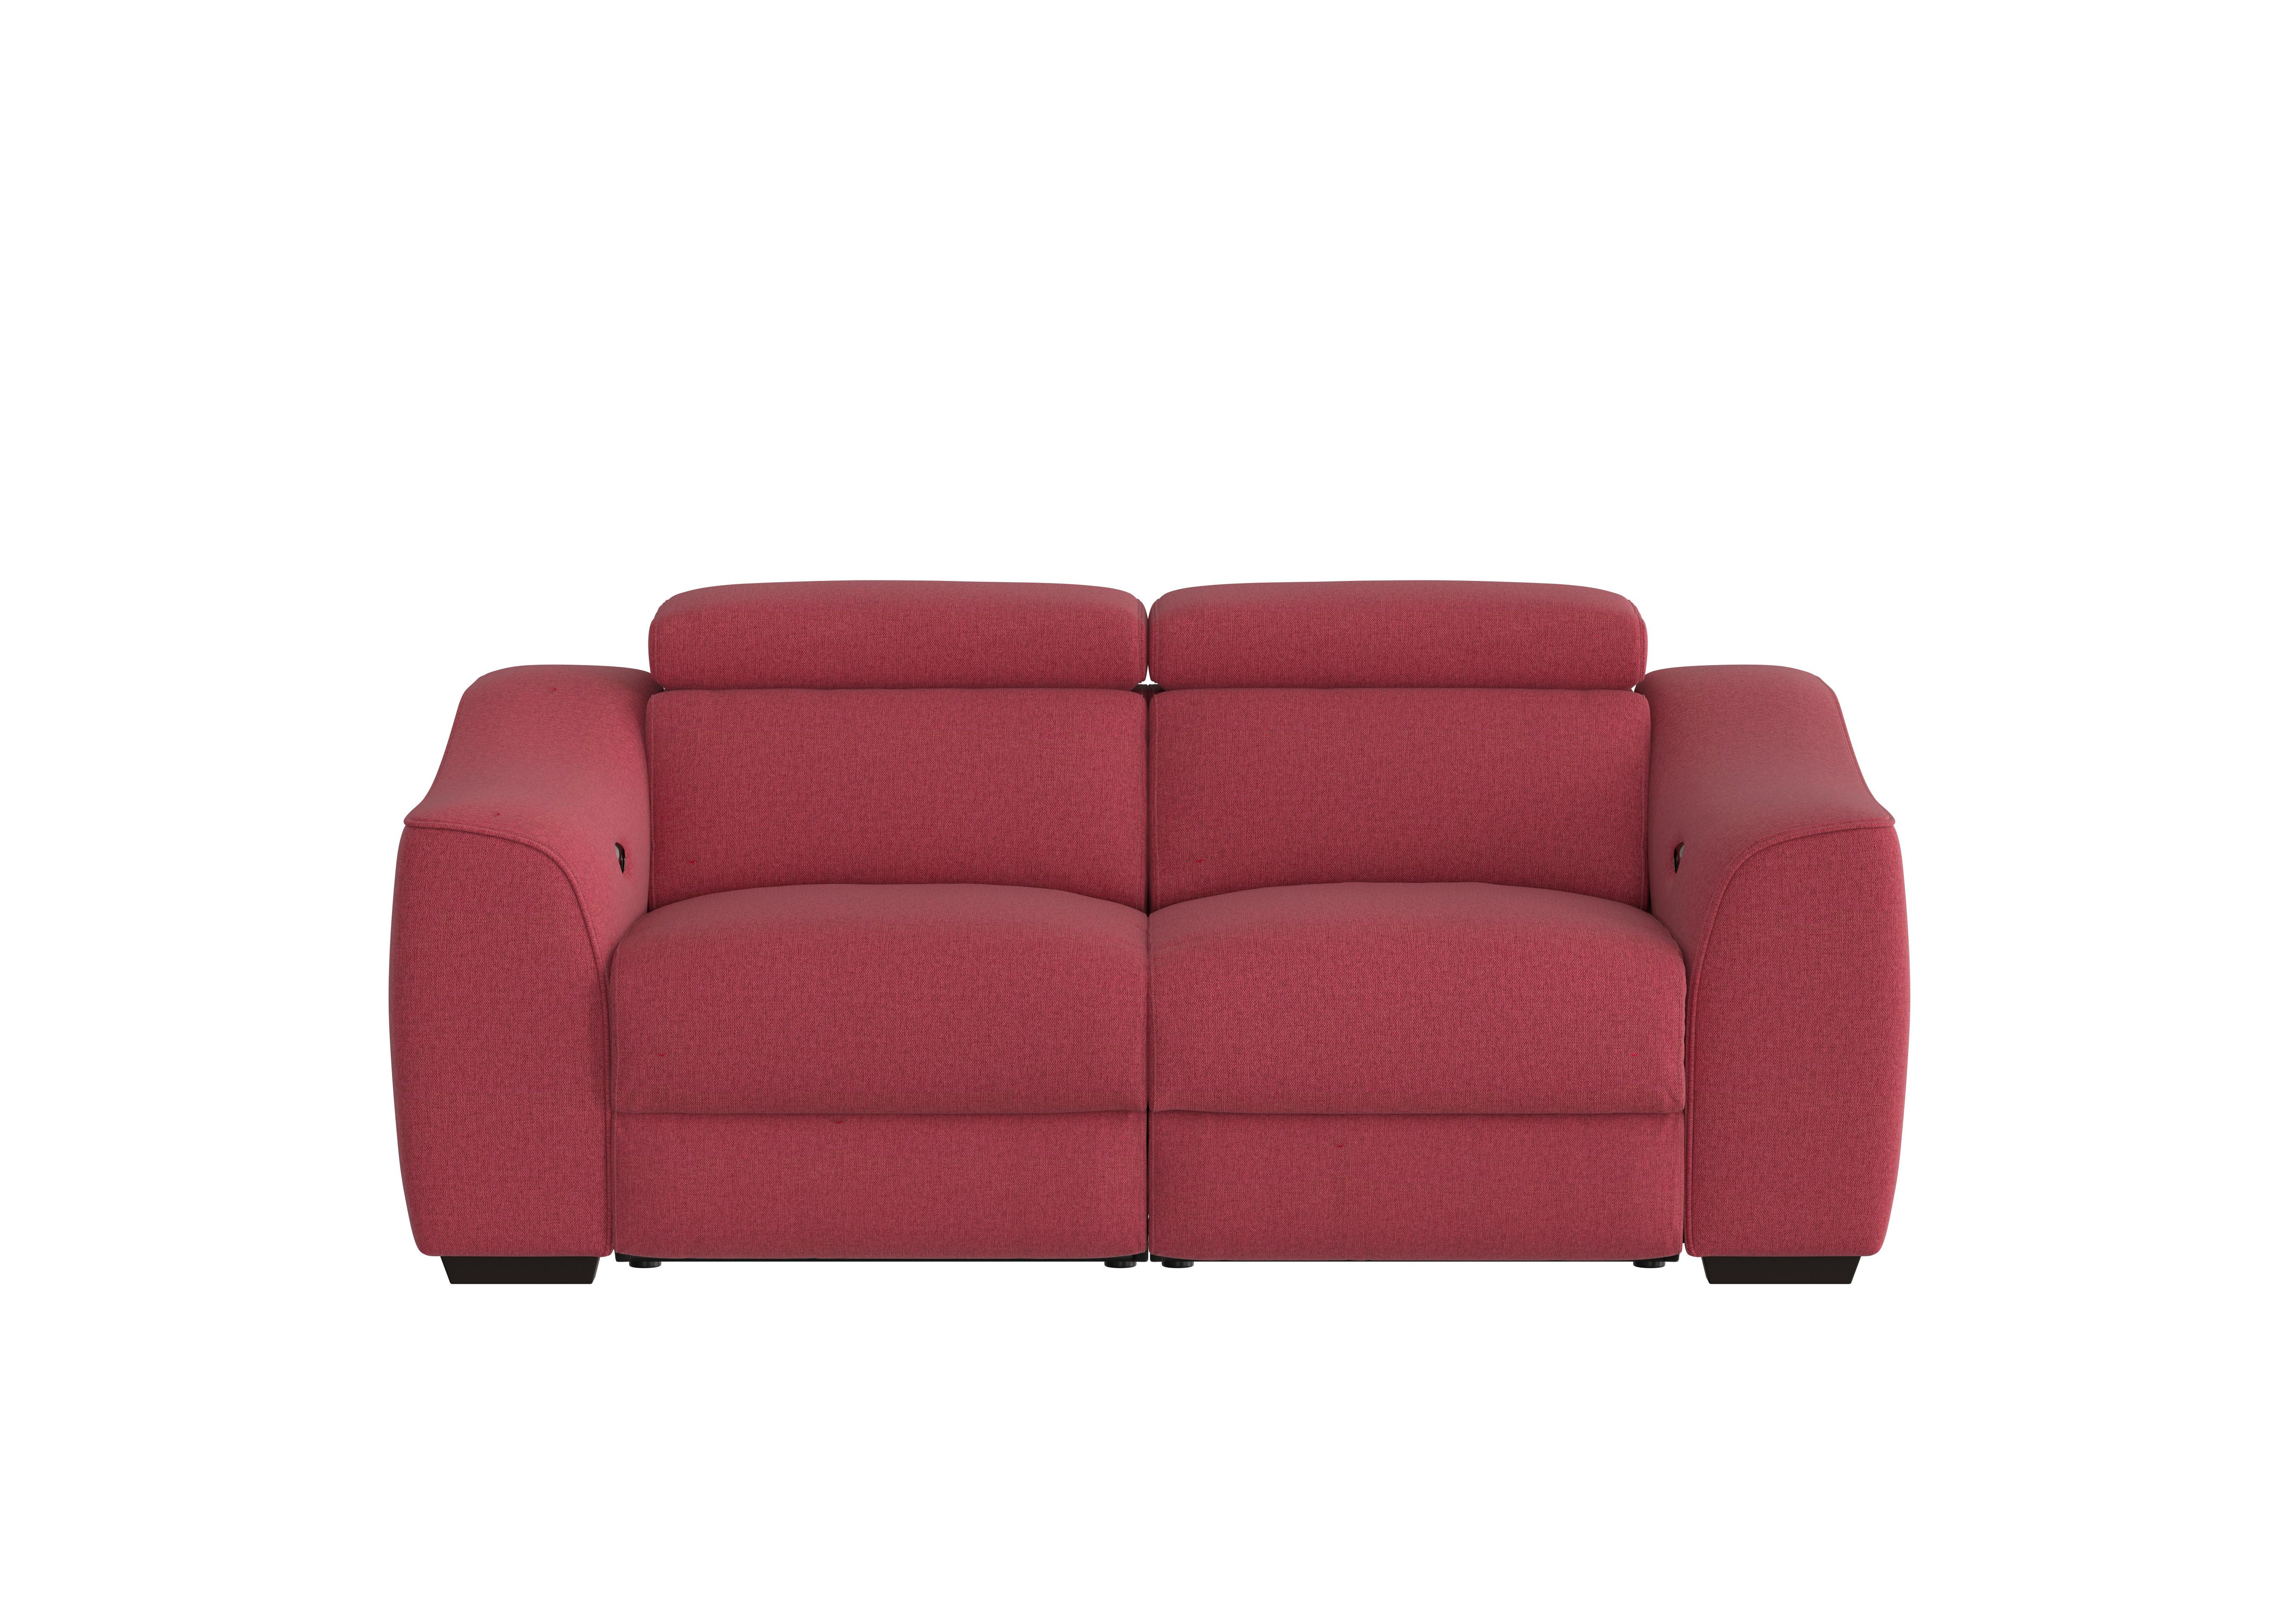 Elixir 2 Seater Fabric Sofa in Fab-Blt-R29 Red on Furniture Village